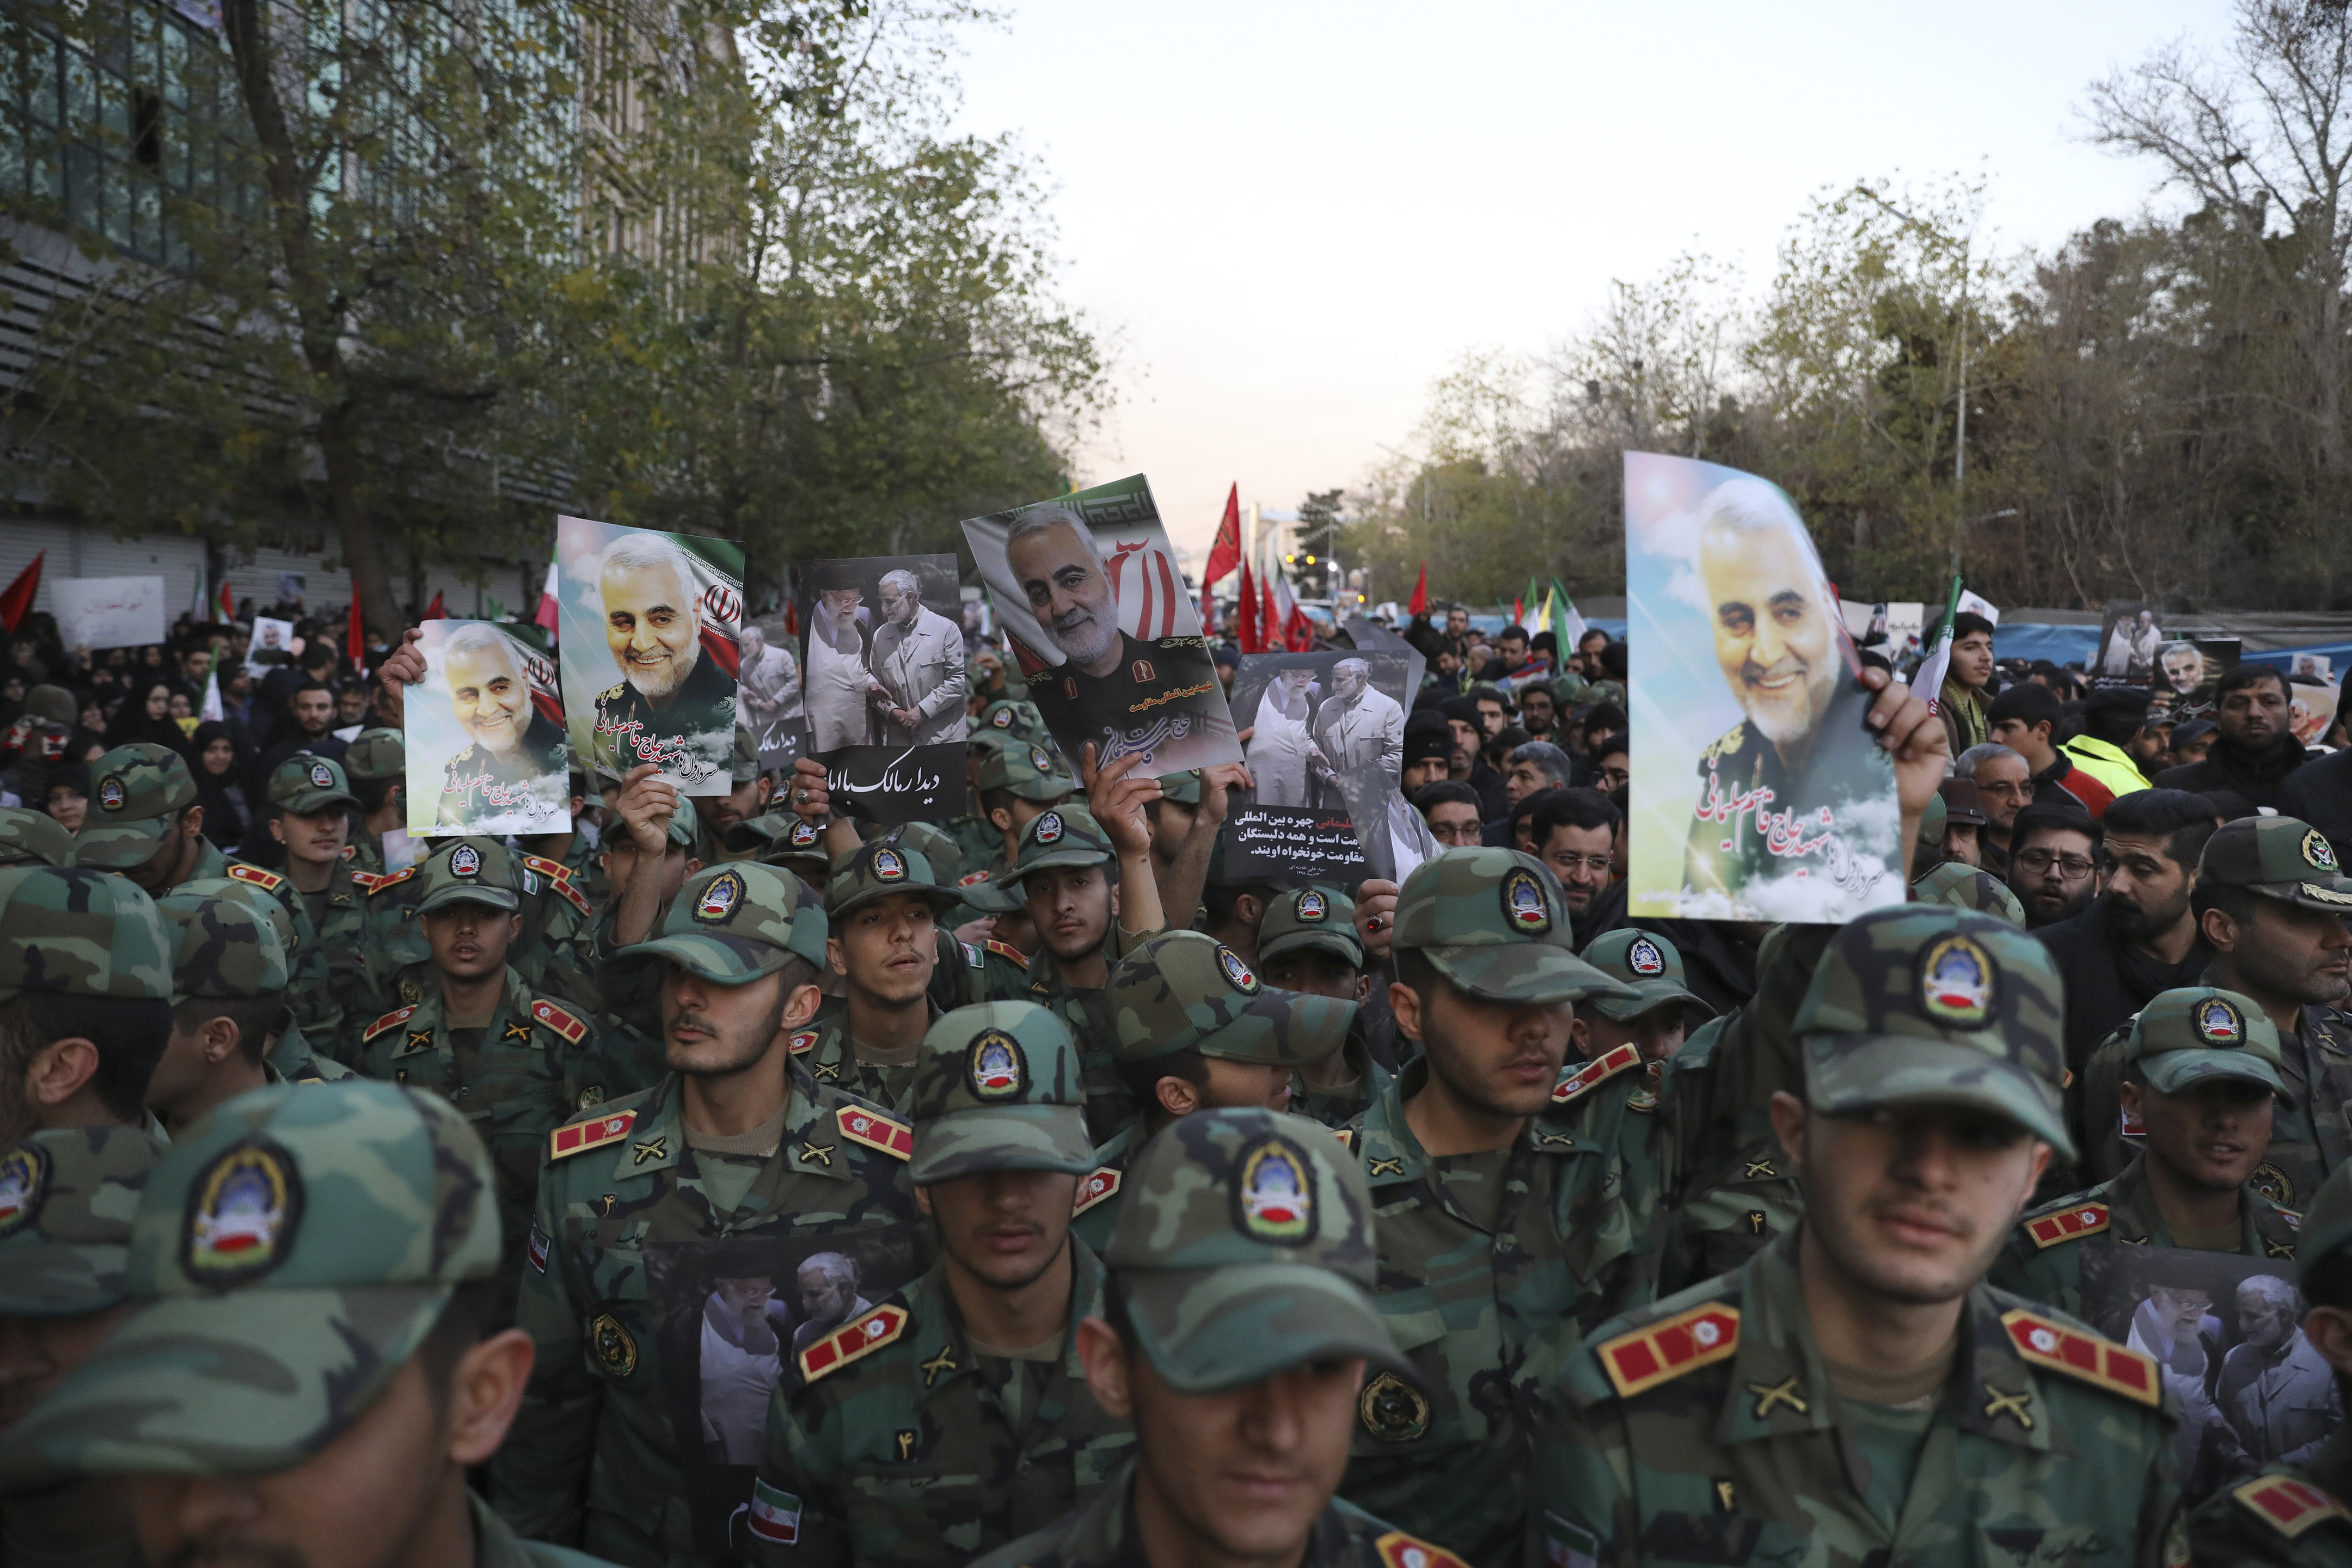 Army cadets attend a funeral ceremony for Iranian Gen. Qassem Soleimani, shown in posters, and his comrades, who were killed in Iraq in a U.S. drone strike on Friday, at the Enqelab-e-Eslami (Islamic Revolution) square in Tehran, Iran, Monday, Jan. 6, 2020. (AP Photo/Ebrahim Noroozi)